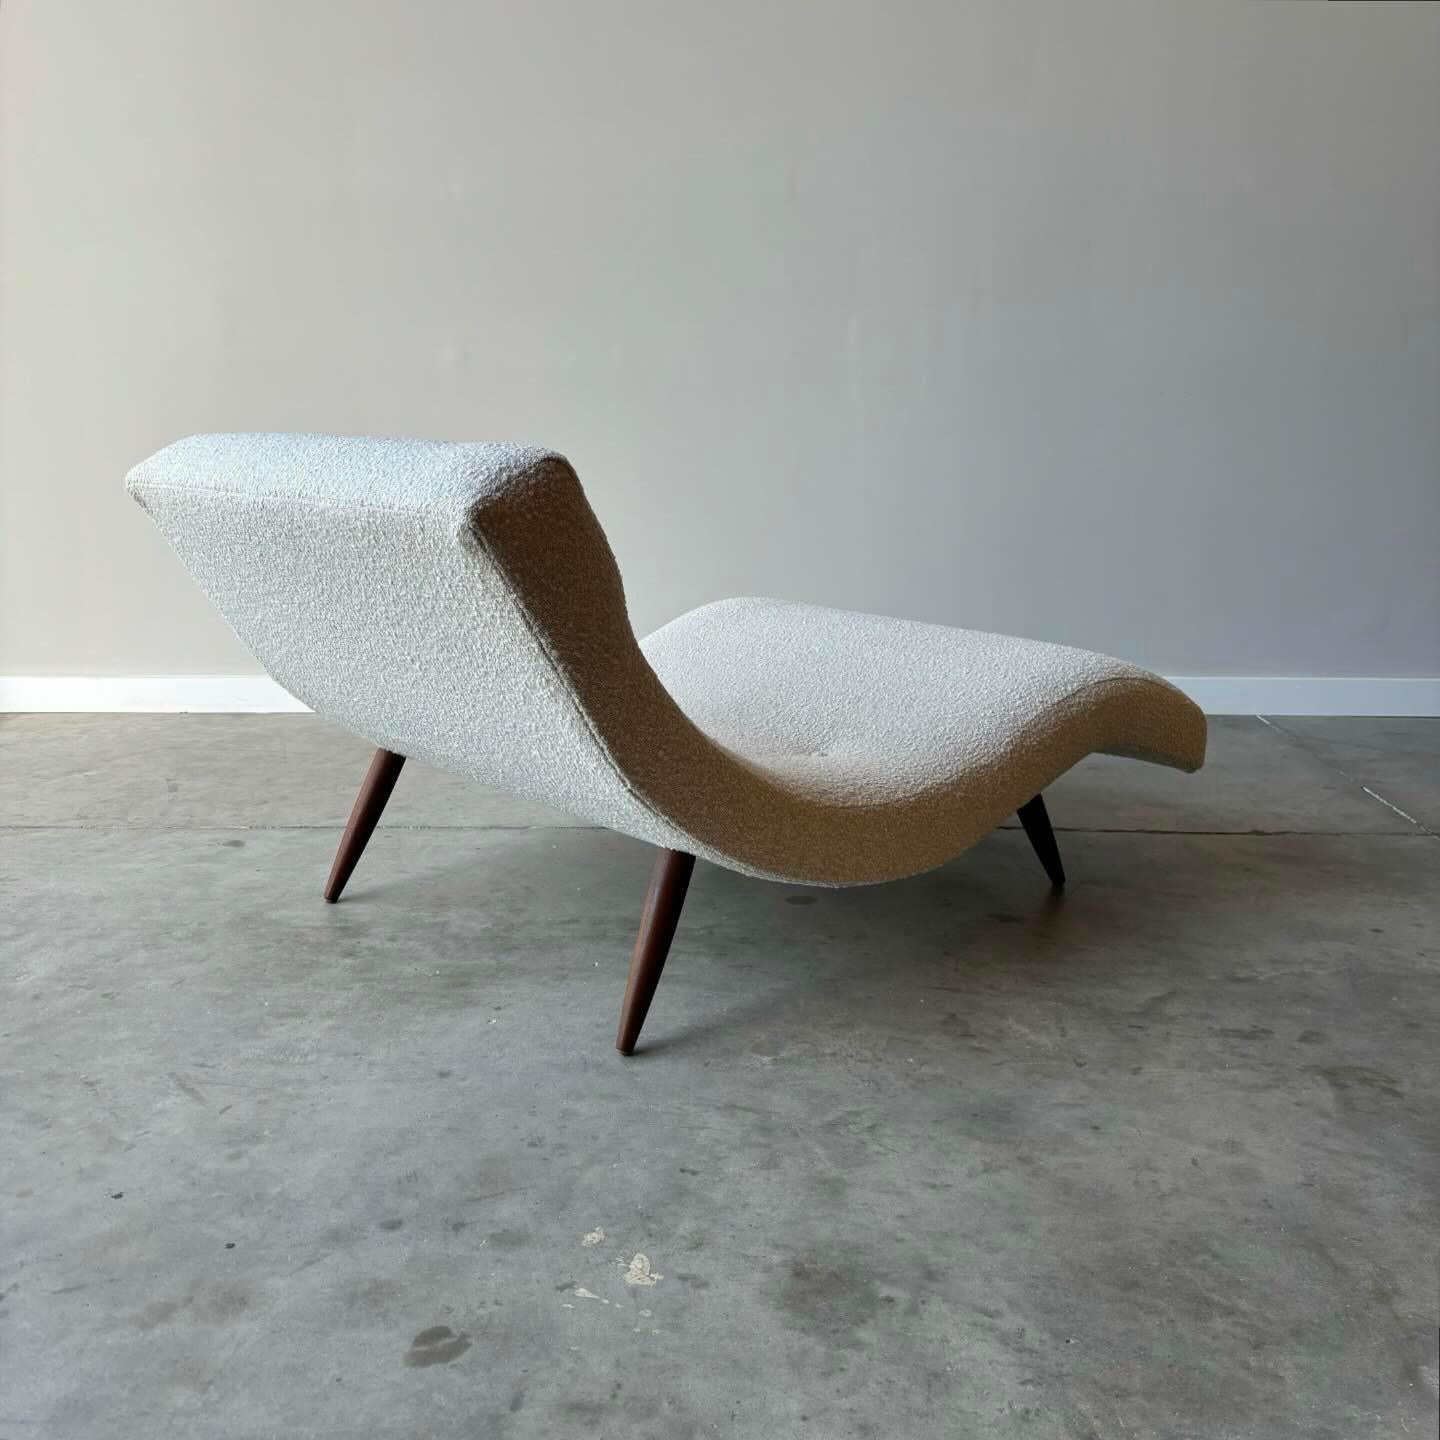 A gorgeous mid century modern wave chaise designed by Adrian Pearsall for Craft Associates Model 108-C. 

Curvaceous and stylish lounge newly upholstered in a fine ivory boucle fabric. This is not only a great statement piece, but an extremely